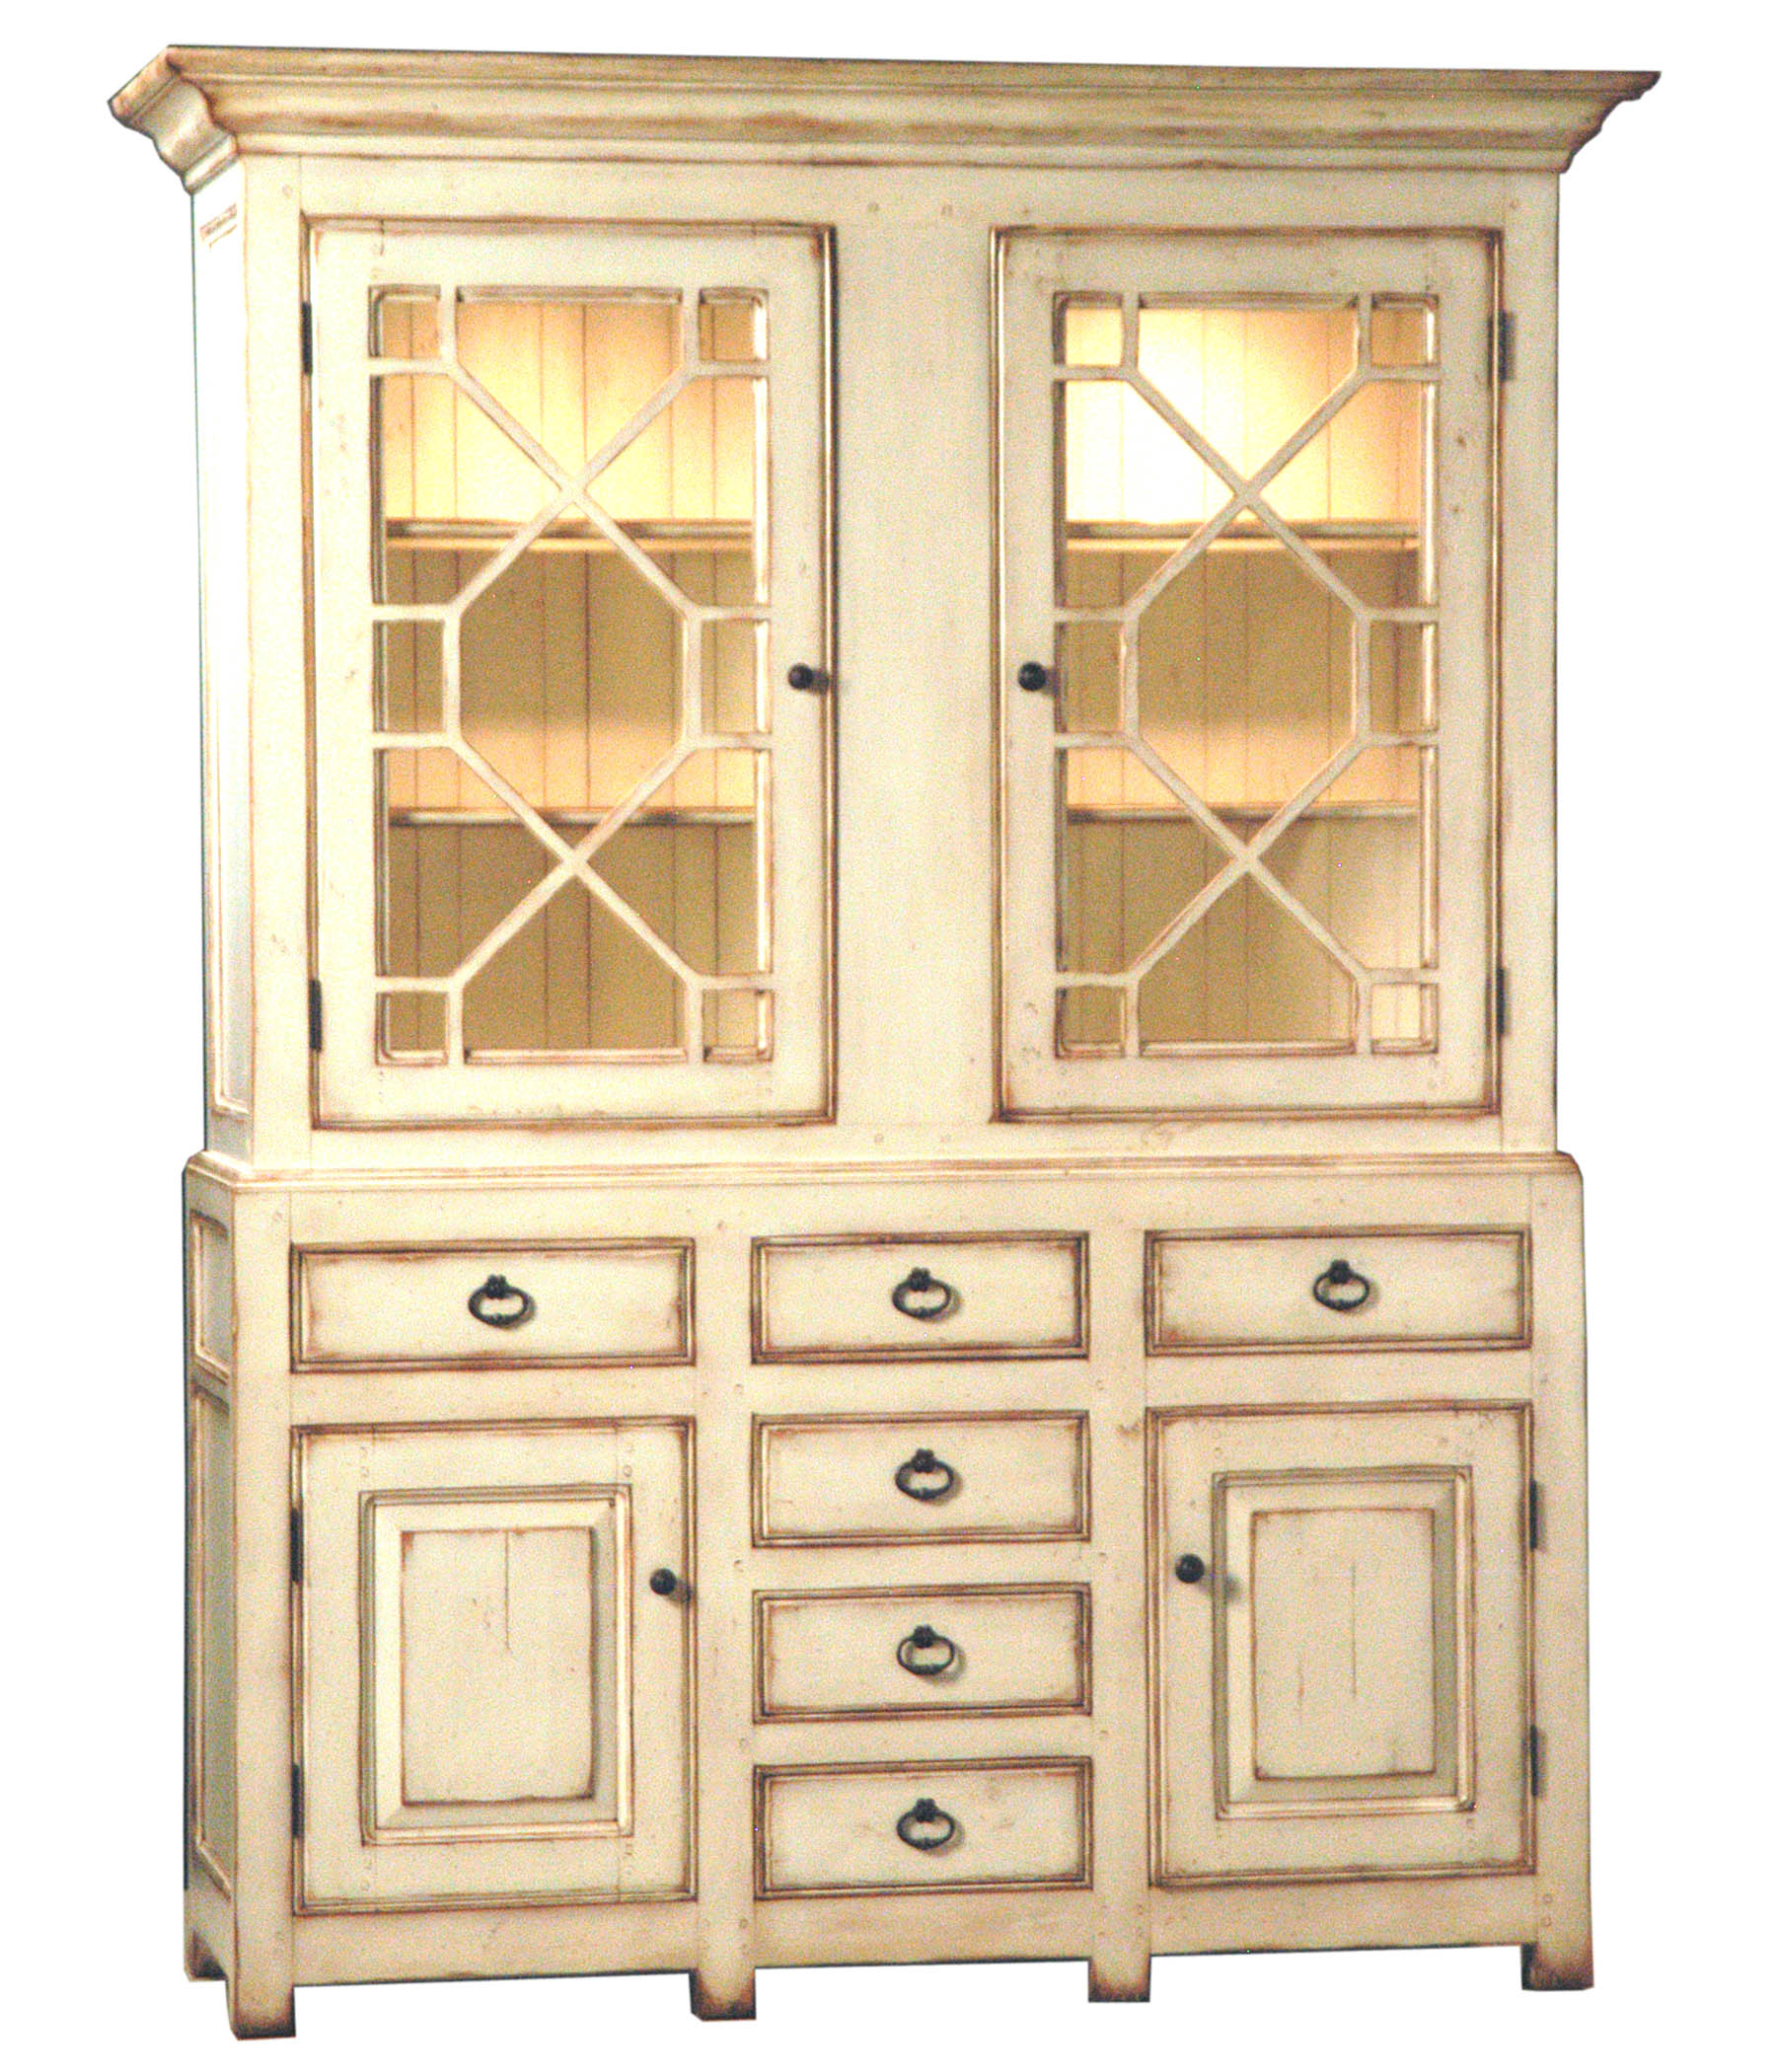 Shelby traditional transitonal farmhouse hutch and storage display cabinet by Woodland furniture in Idaho Falls